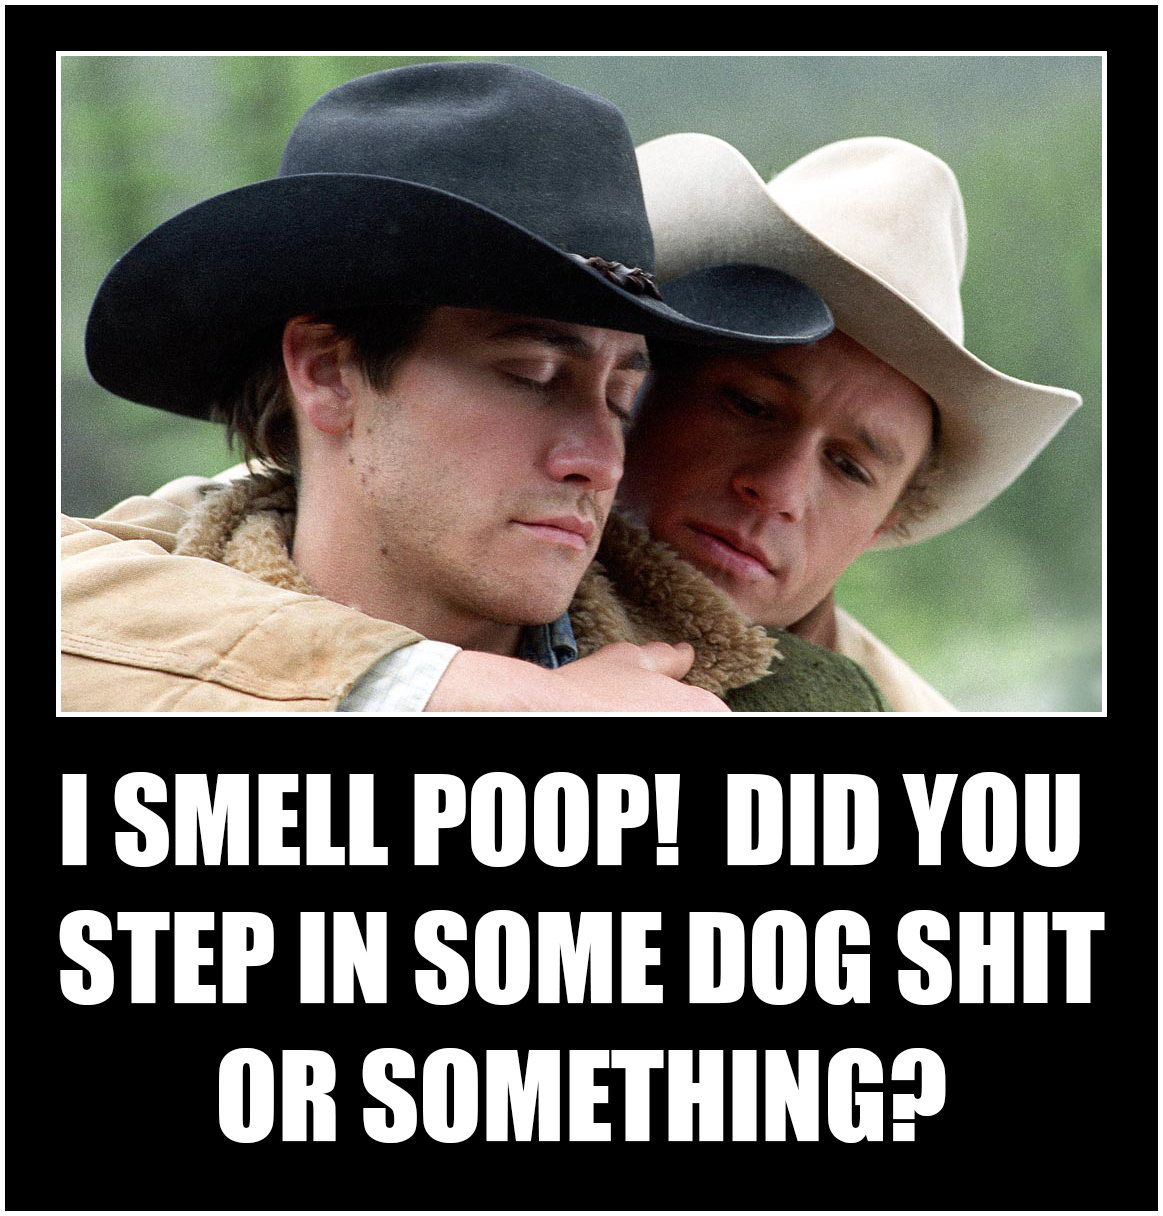 brokeback mountain meme - I Smell Poop! Did You Step In Some Dog Shit Or Something?